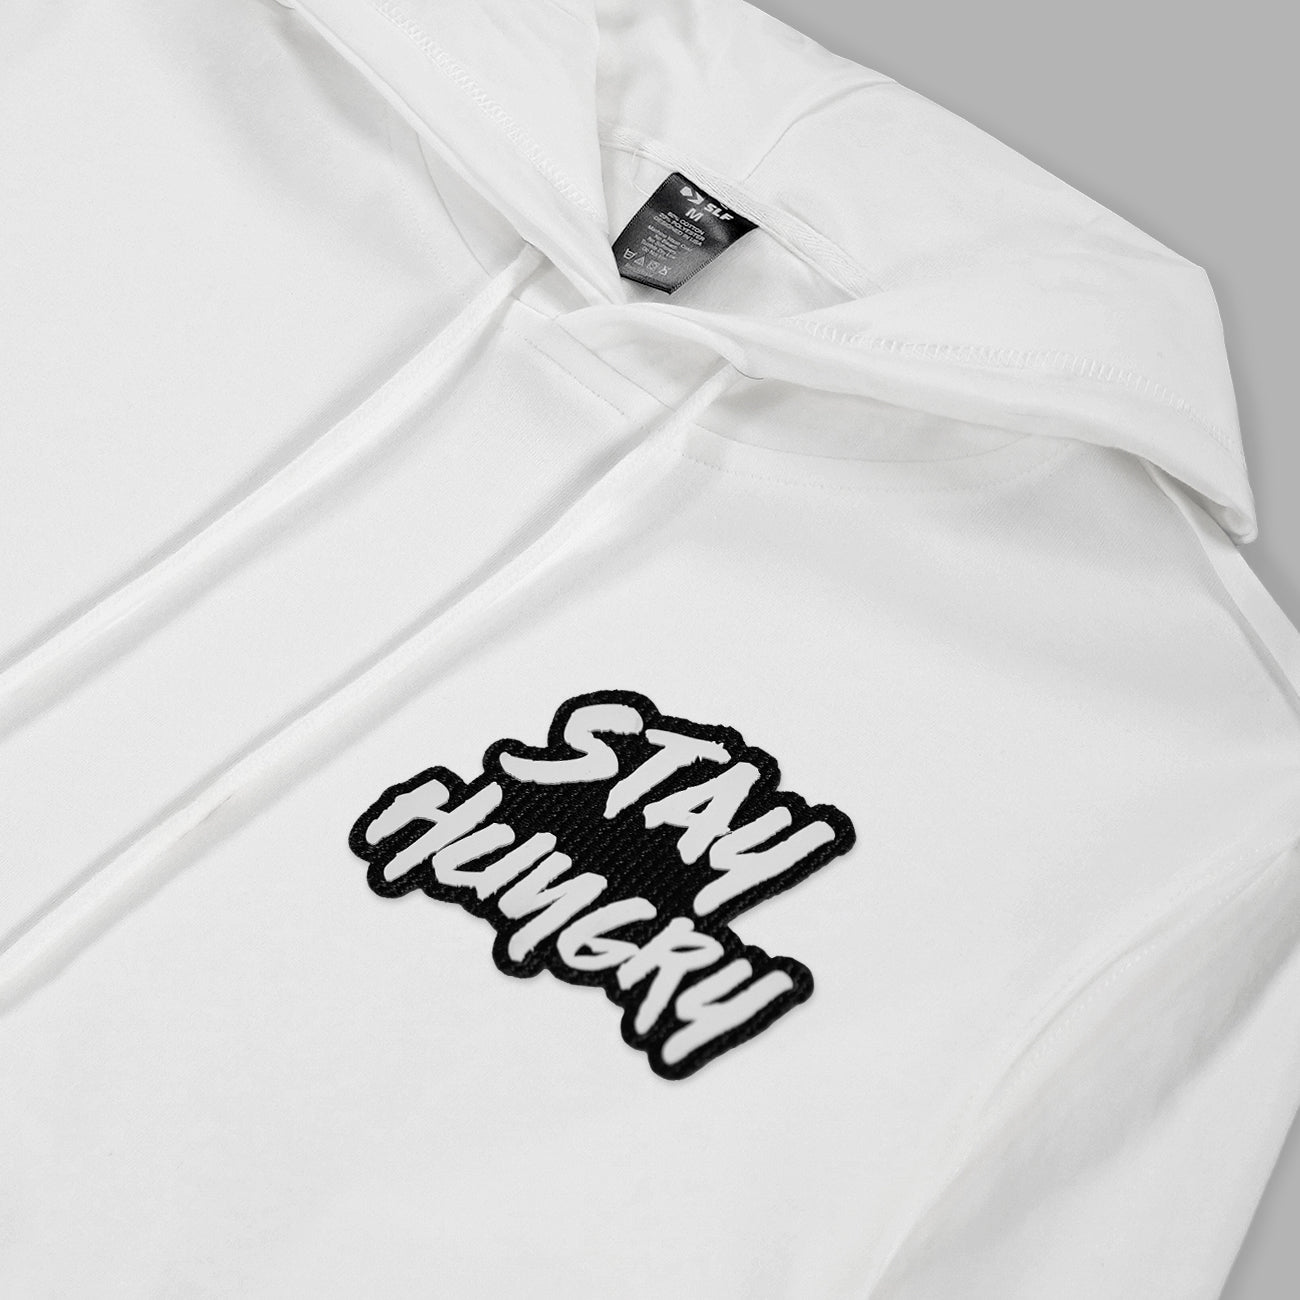 Stay Hungry Patch Hoodie